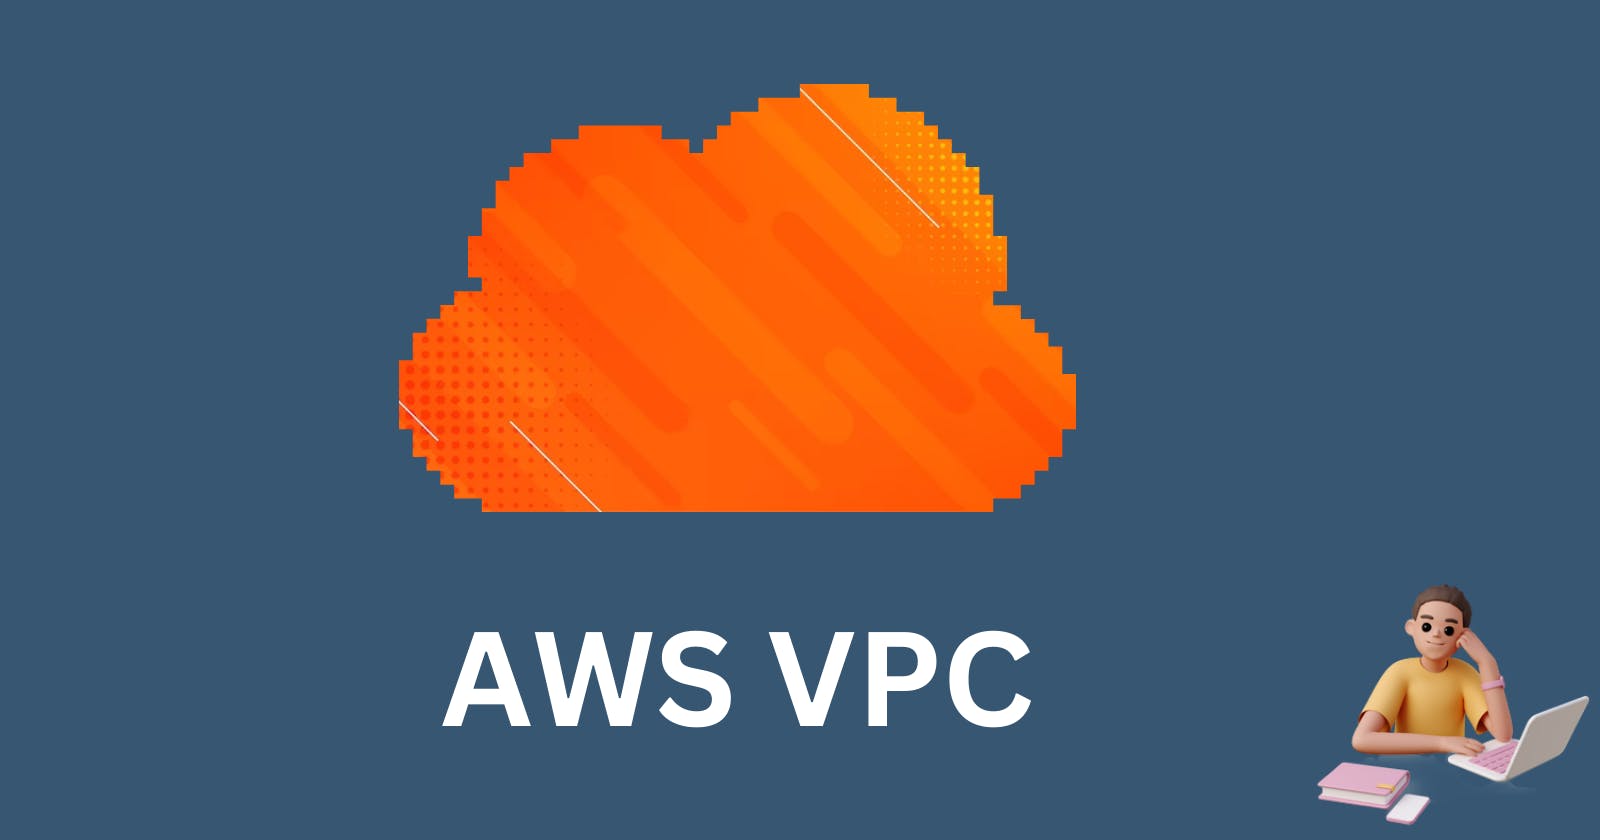 The Complete Guide to AWS VPC (Amazon Virtual Private Cloud)